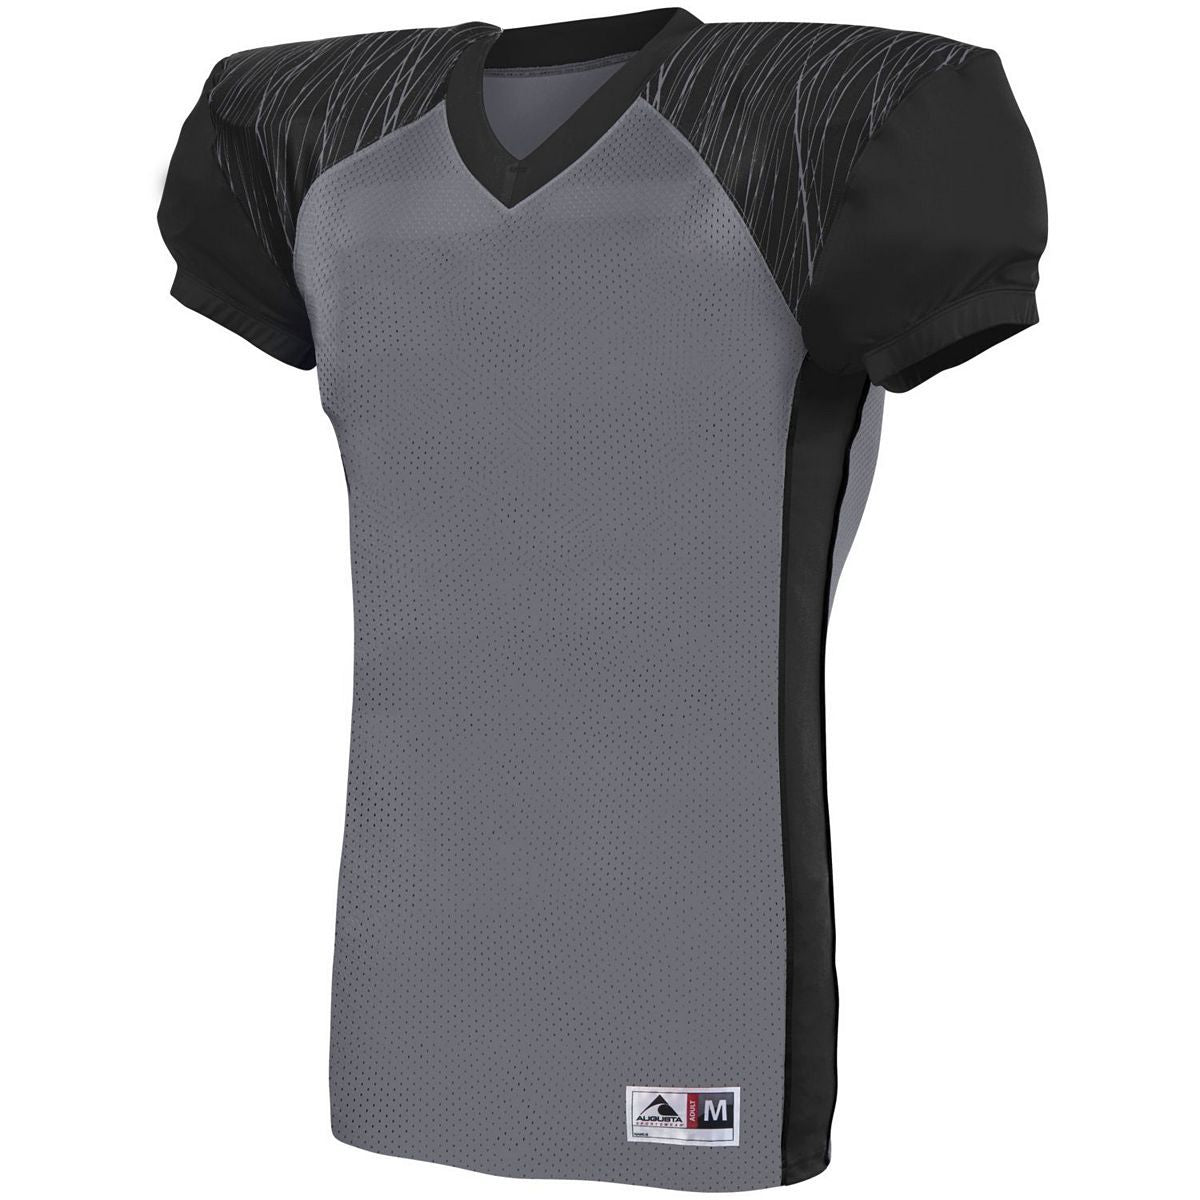 Augusta Sportswear Youth Zone Play Jersey in Graphite/Black/Graphite Print  -Part of the Youth, Youth-Jersey, Augusta-Products, Football, Shirts, All-Sports, All-Sports-1 product lines at KanaleyCreations.com